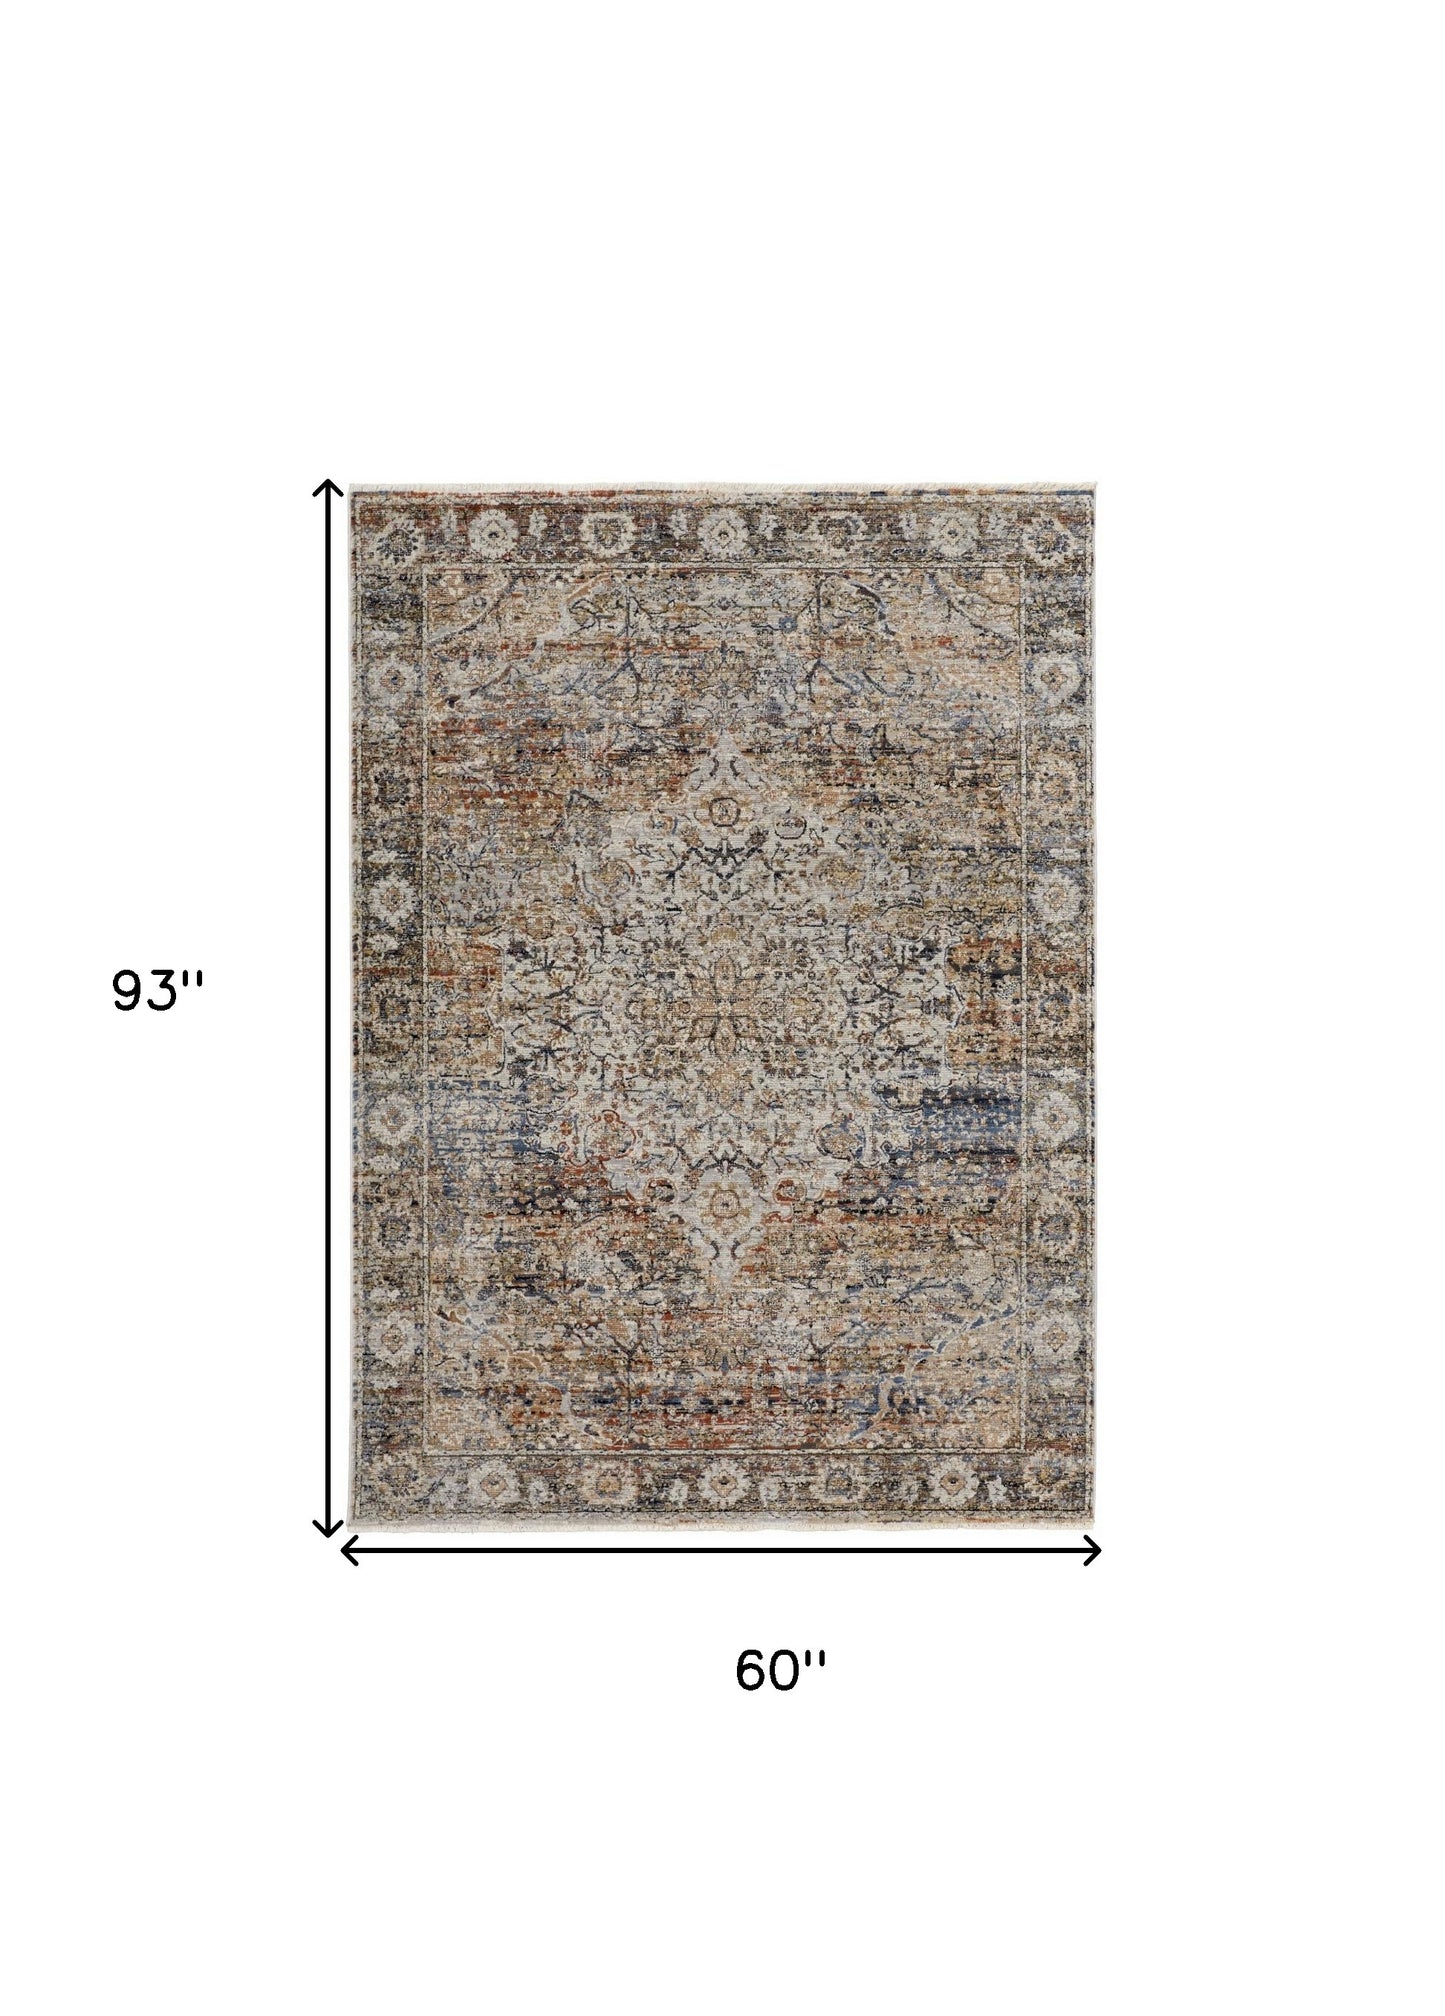 5' X 8' Tan Orange And Blue Floral Power Loom Distressed Area Rug With Fringe